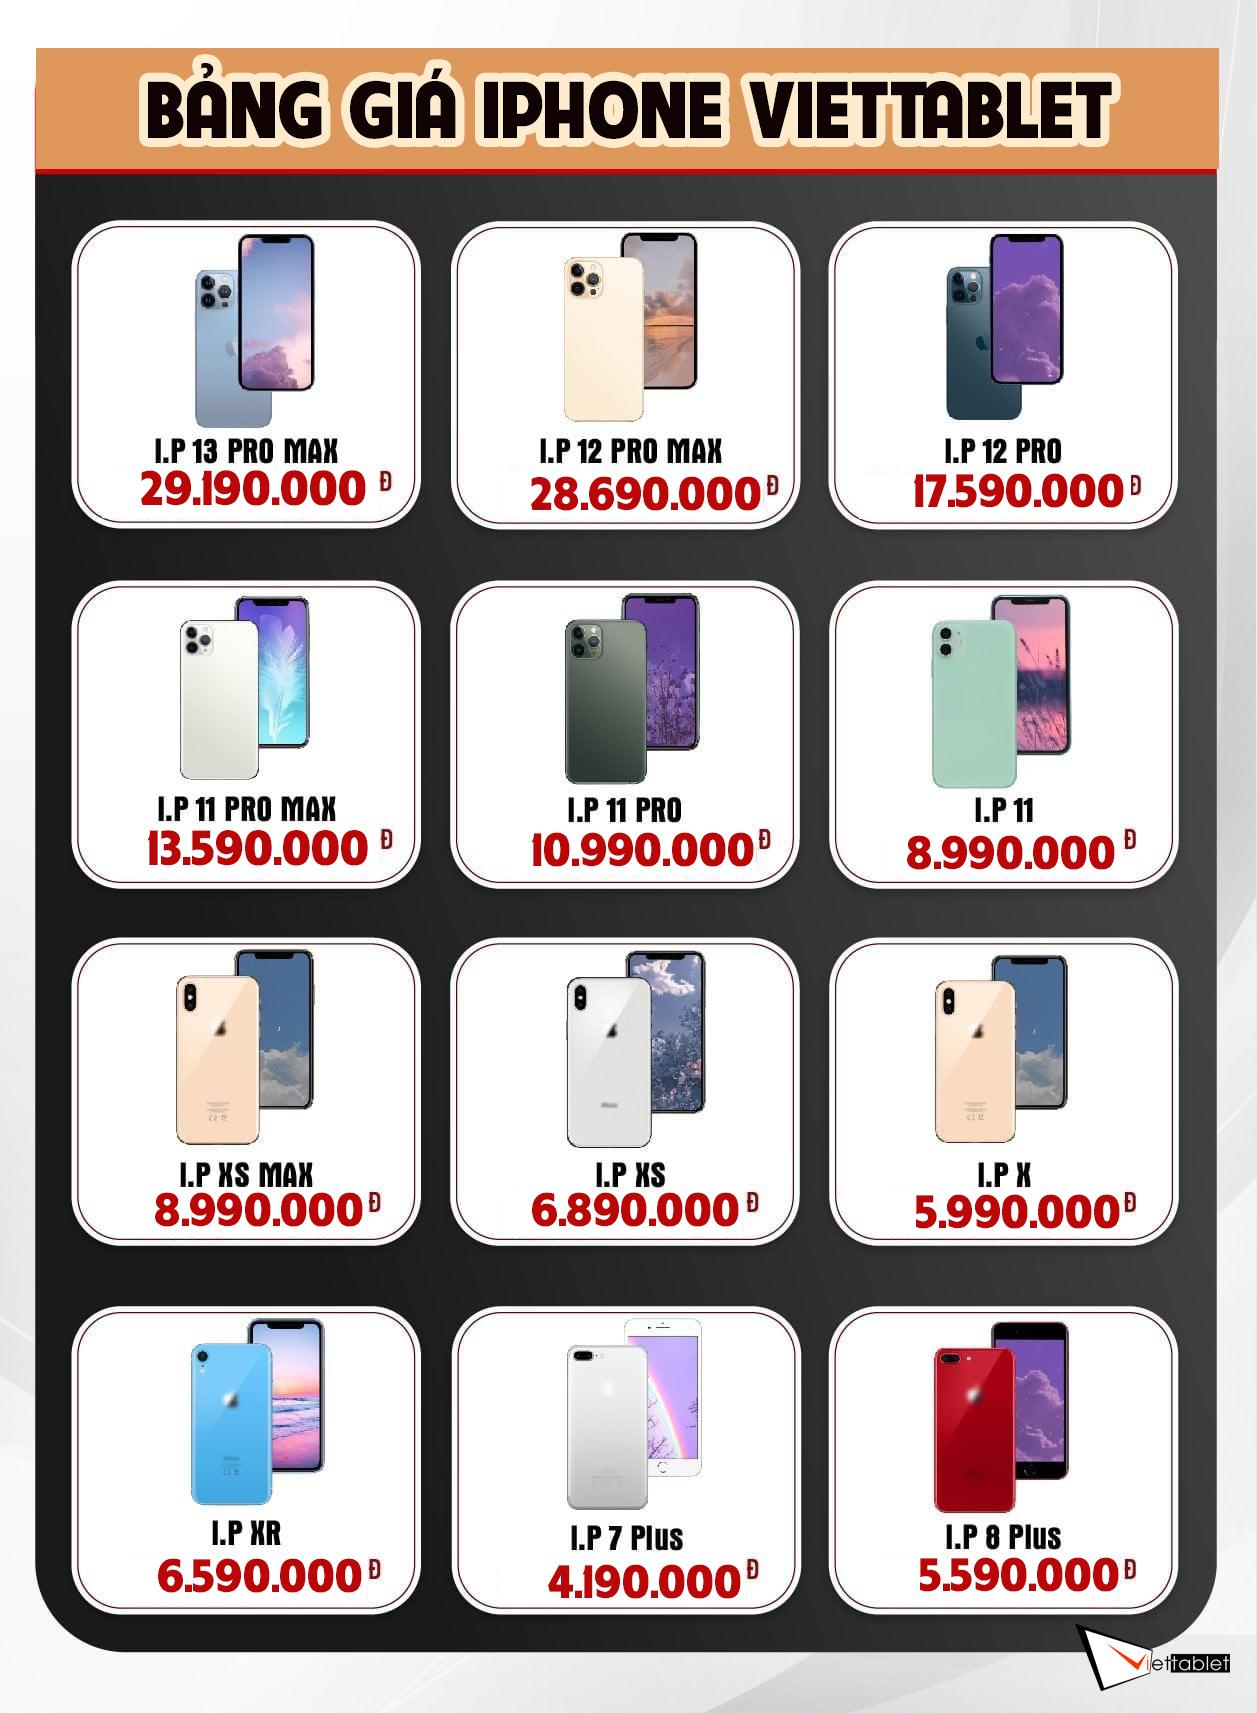 Price list of iPhone, iPad in April_ iPhone 11 is 8.9 million, XS Max is 8 million, 11 Pro Max and iPad Pro M1 are very good prices!  - Photo 2.